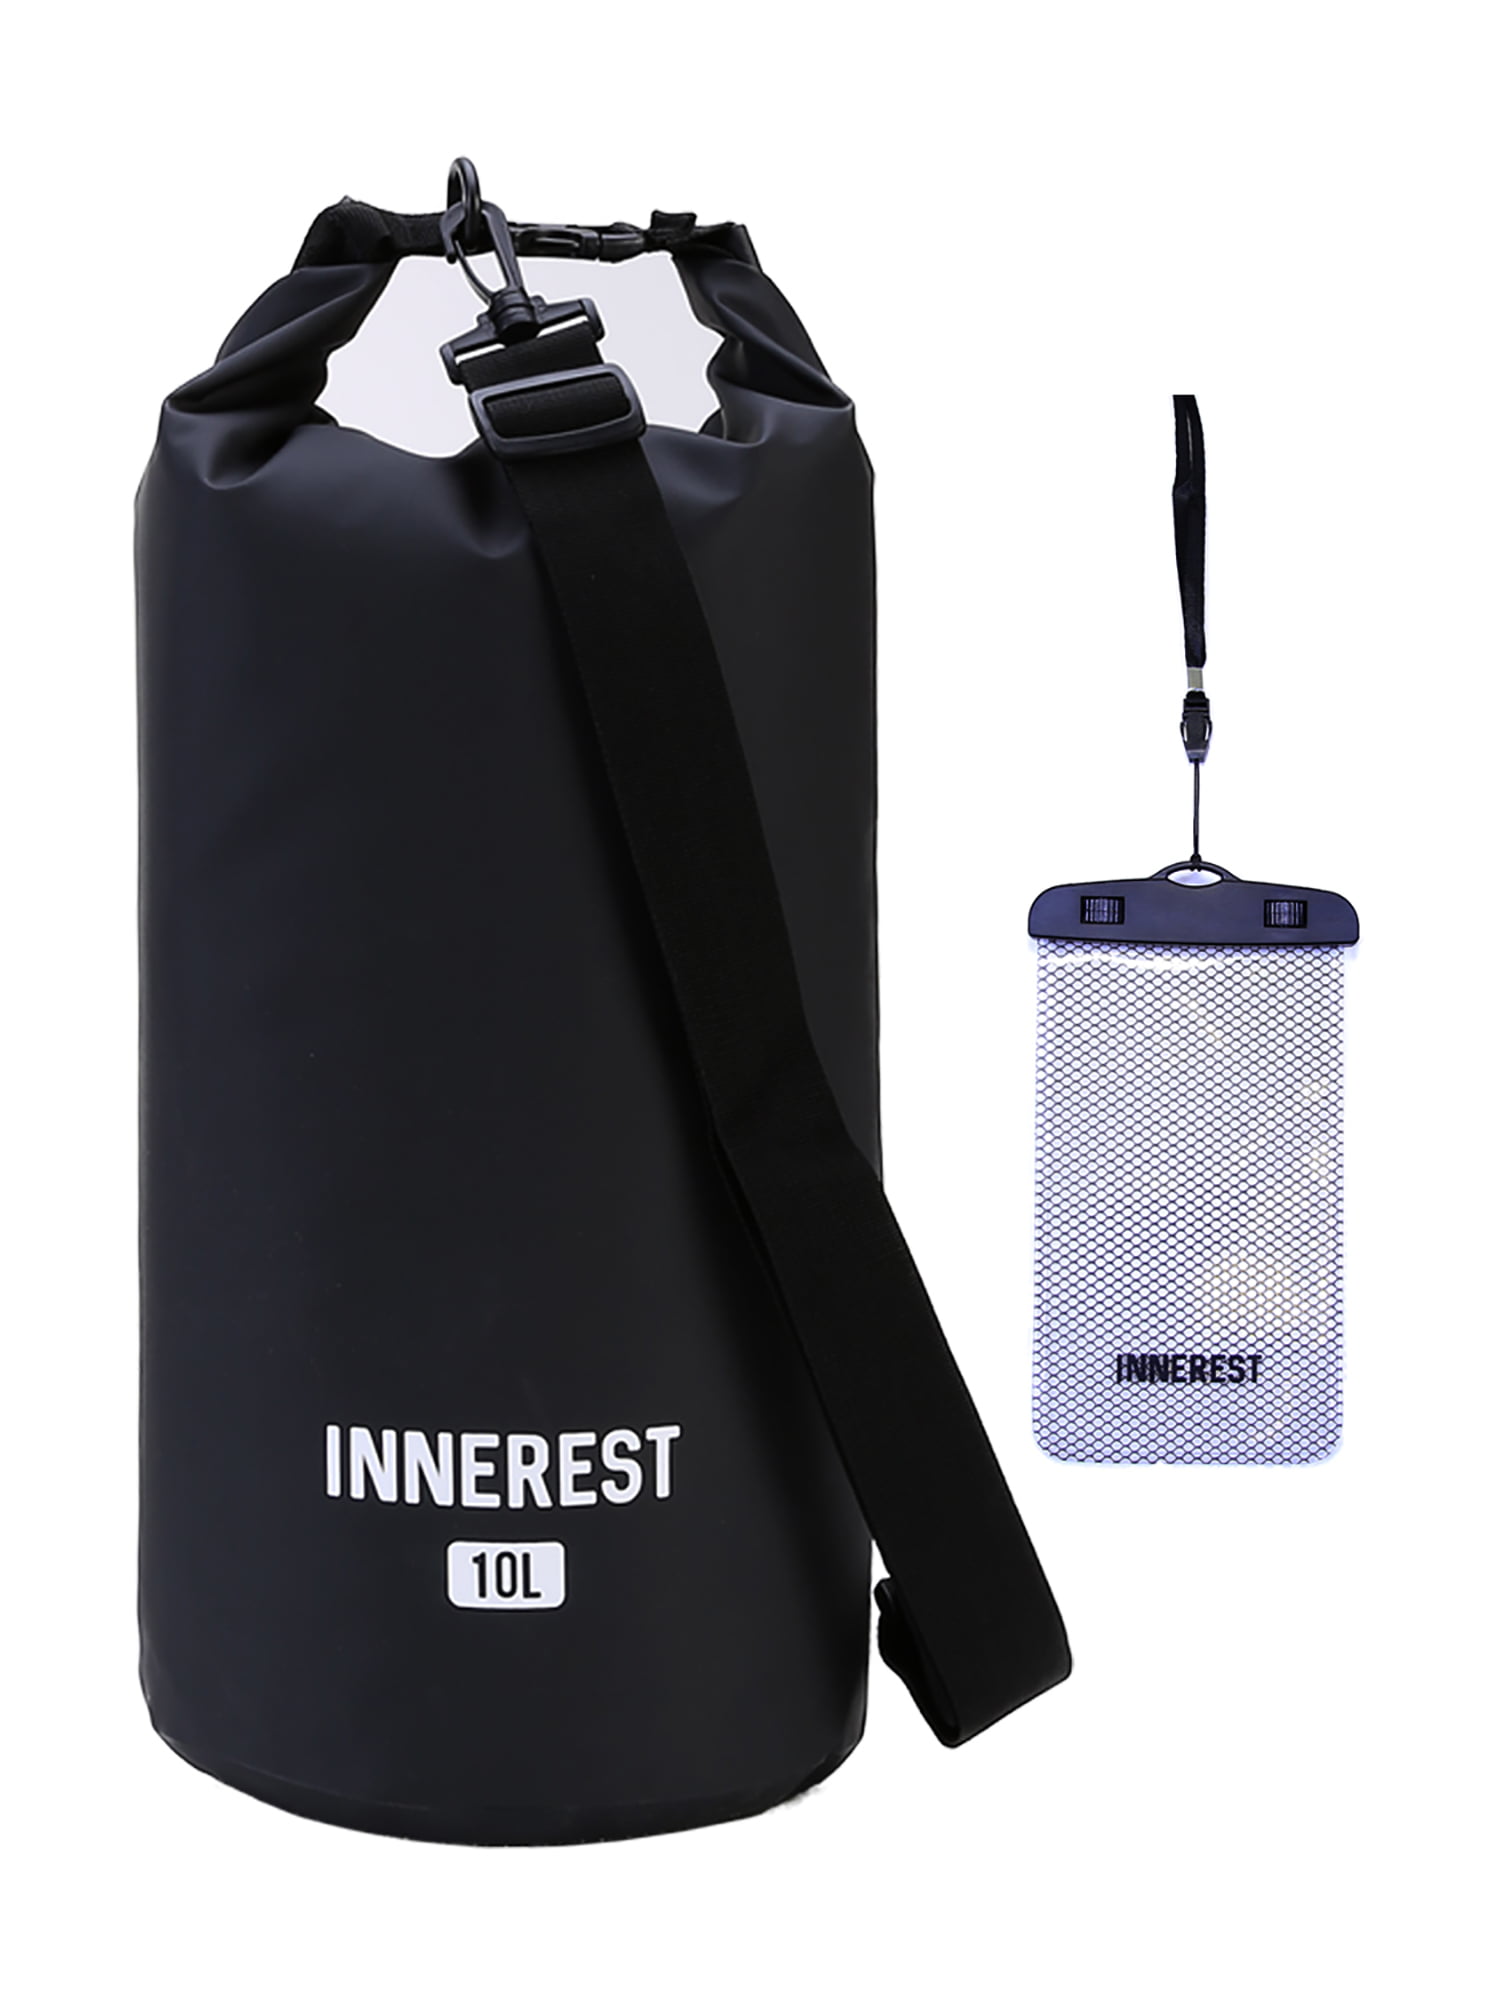 Innerest Waterproof Dry Bag Lightweight Sack for Outdoor Water Recreation Beach Boating Camping Fishing Kayaking with a 